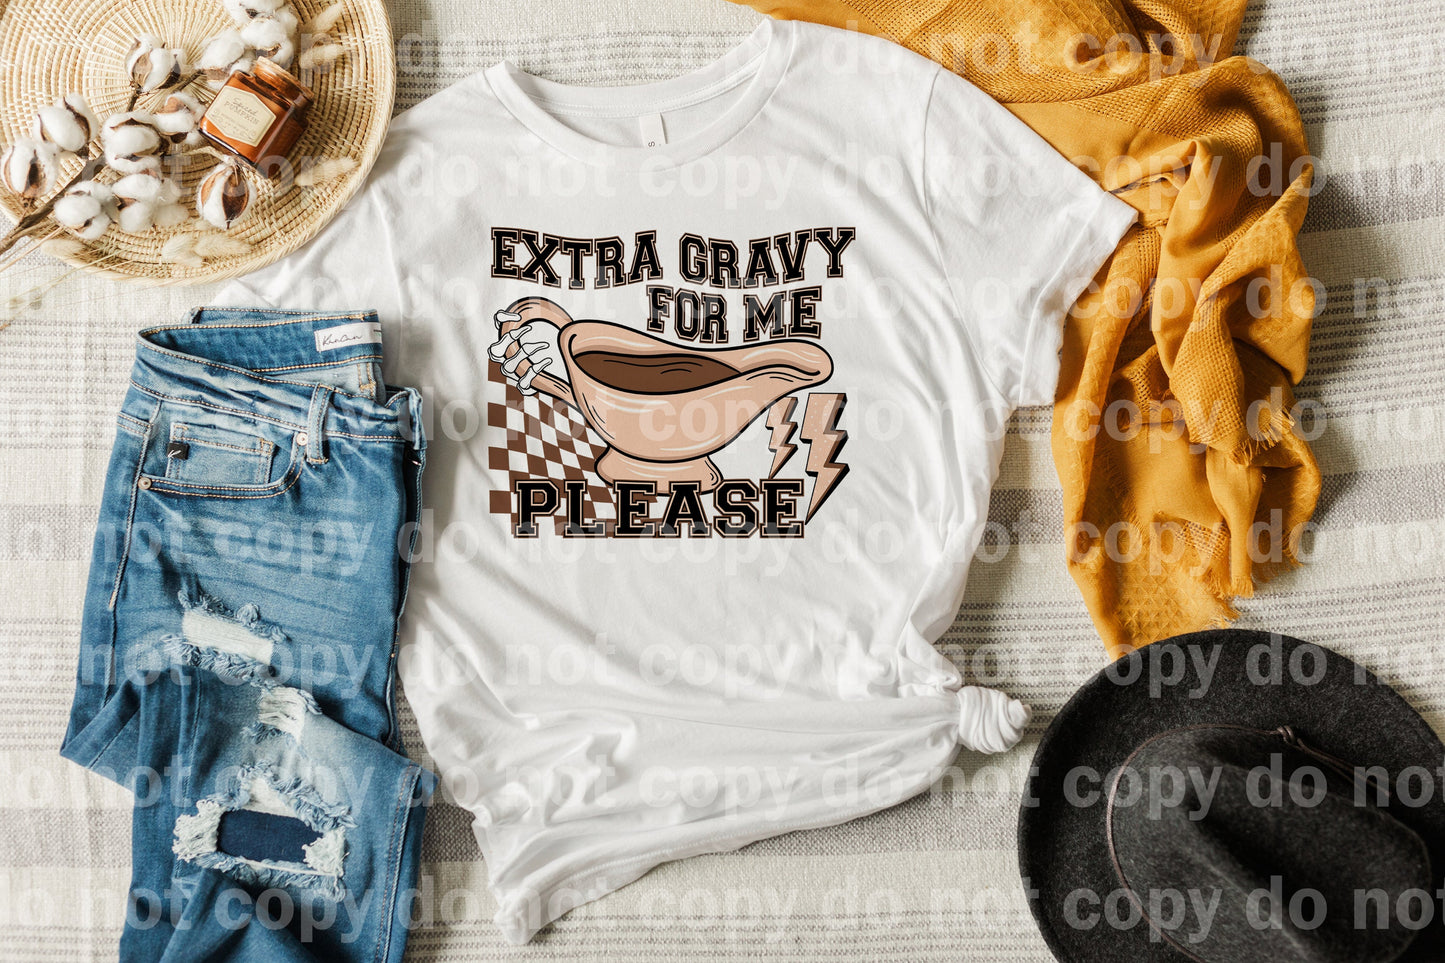 Extra Gravy For Me Please with Pocket Option Dream Print or Sublimation Print